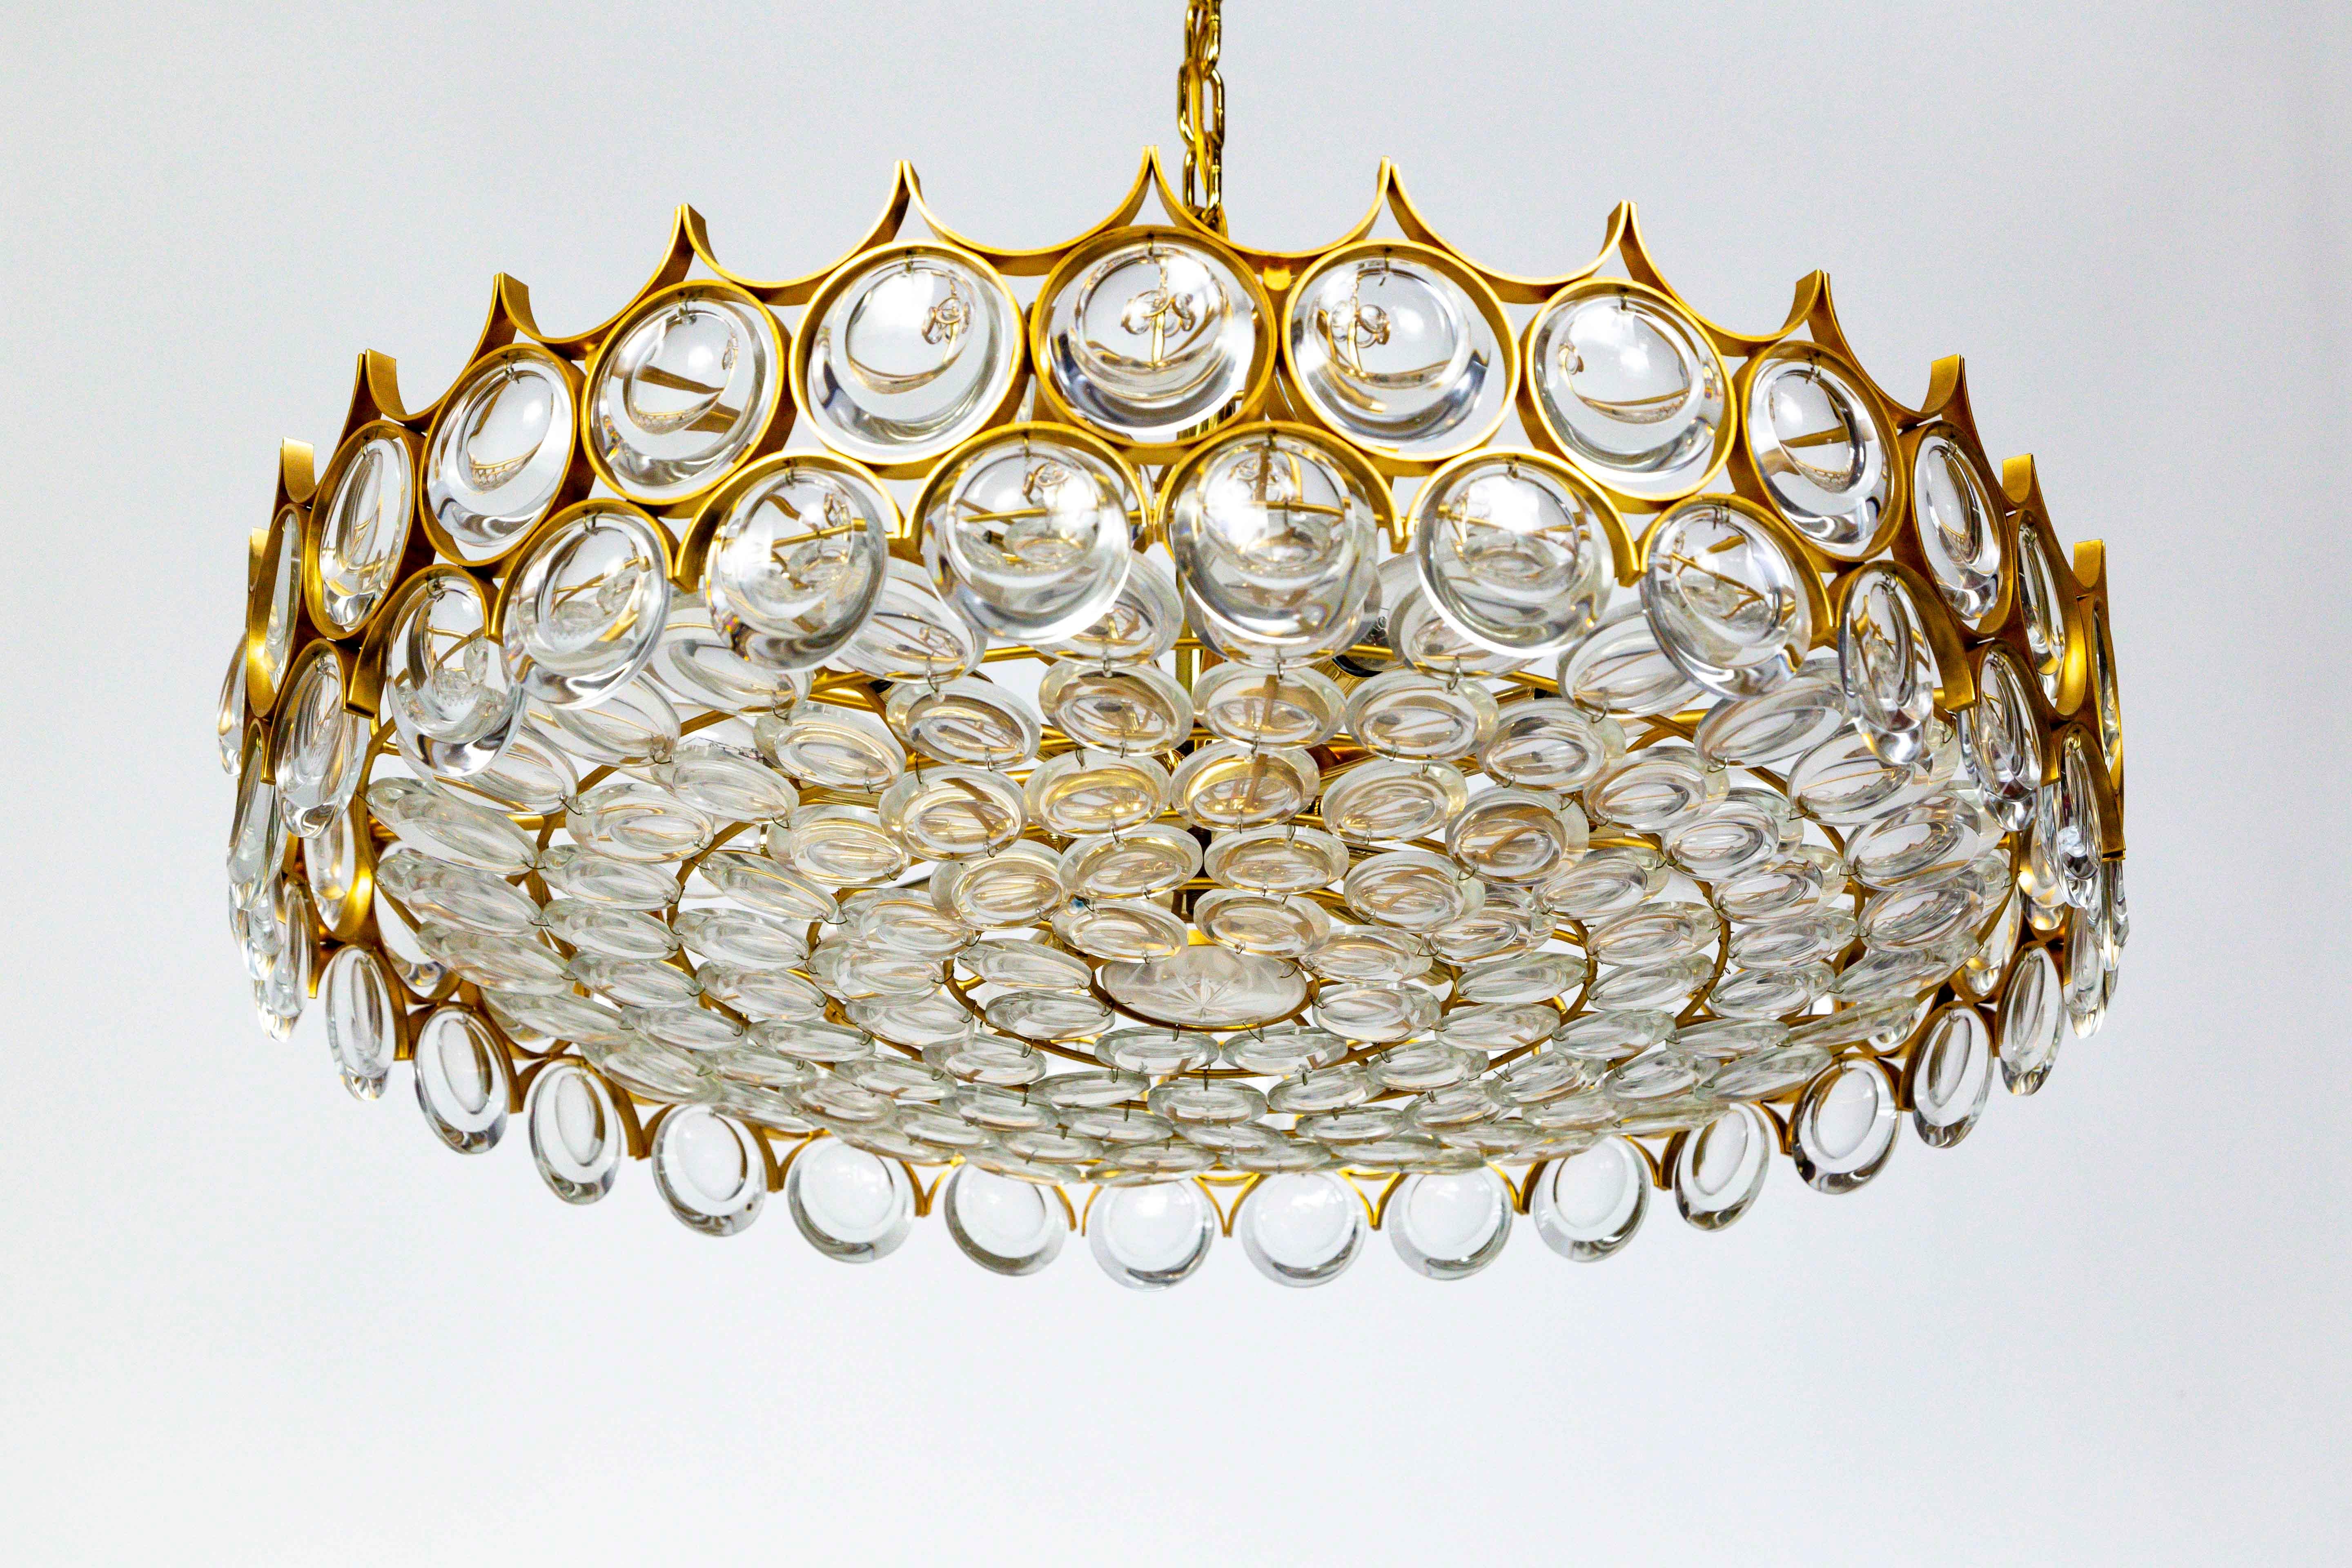 An elegant chandelier filled with dangling and strung, optical lens crystals in a gold armature forming a streamlined, modern shape. Created by Palwa of Germany in the 1960s.

9 candelabra lights, newly rewired. 27